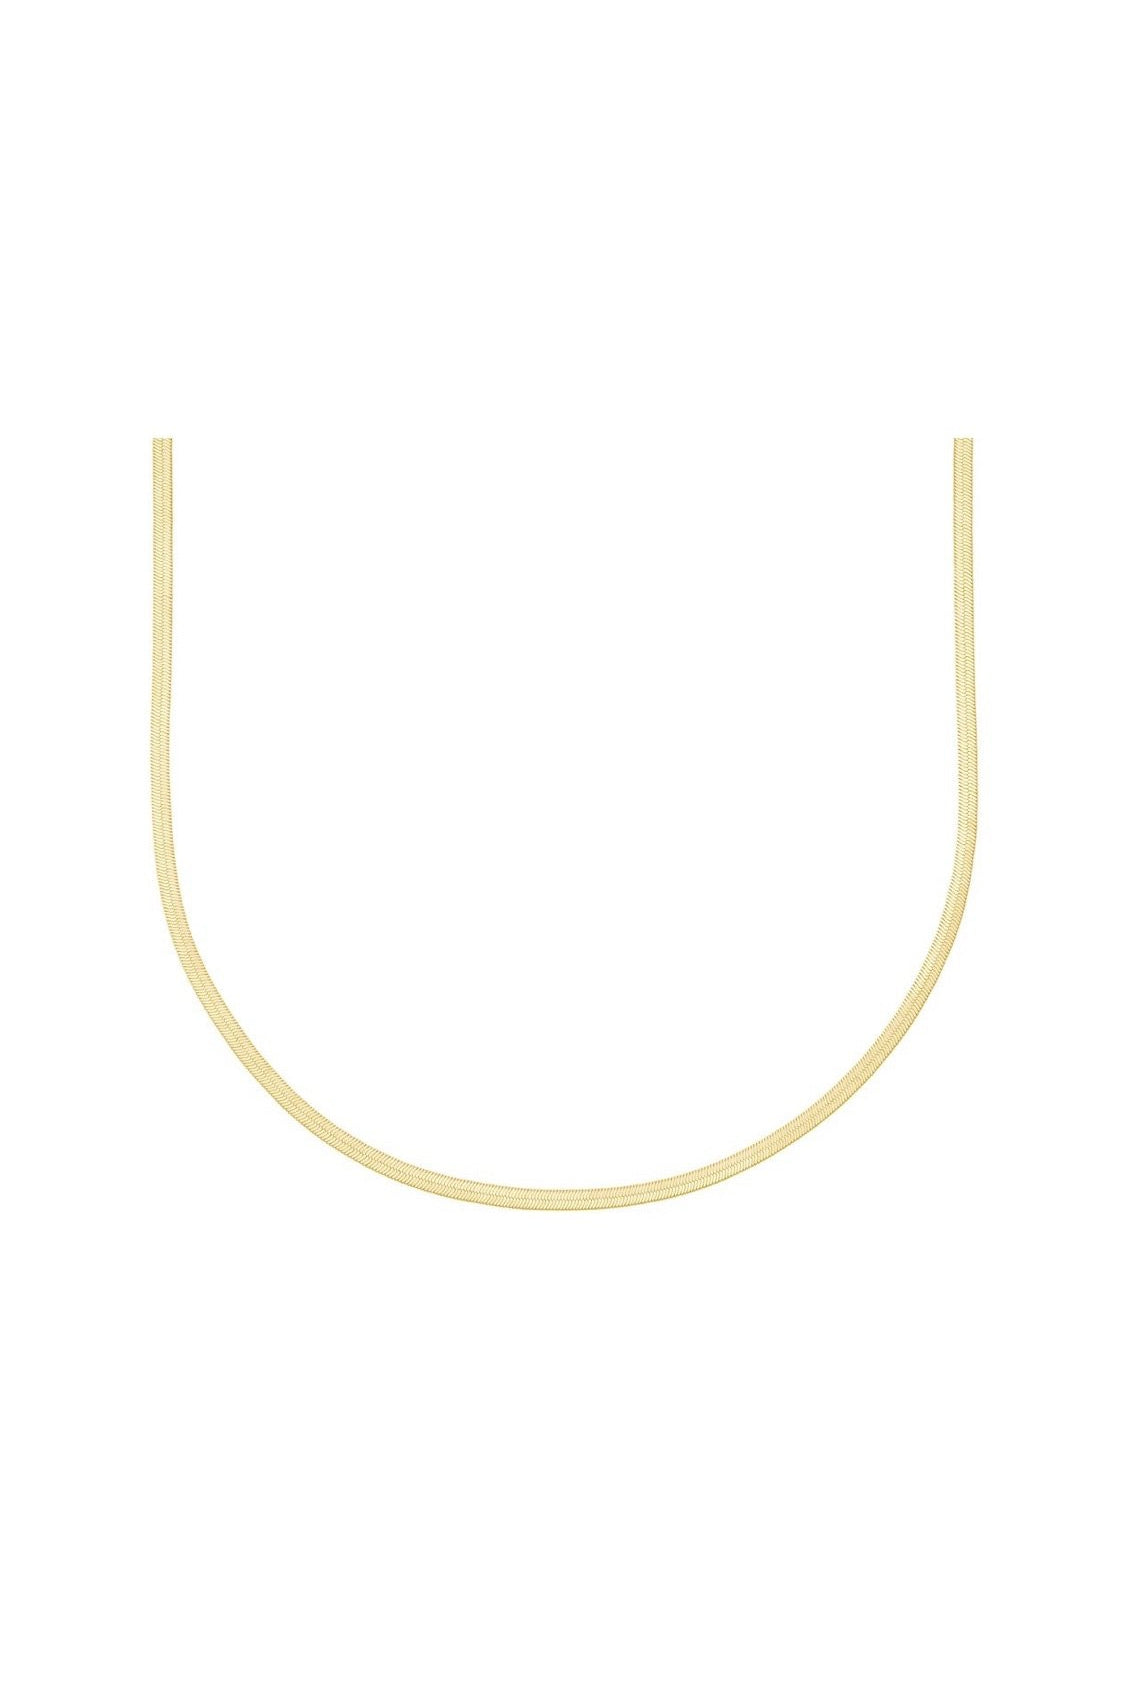 ELECTRIC PICKS PYTHON 3MM NECKLACE IN GOLD